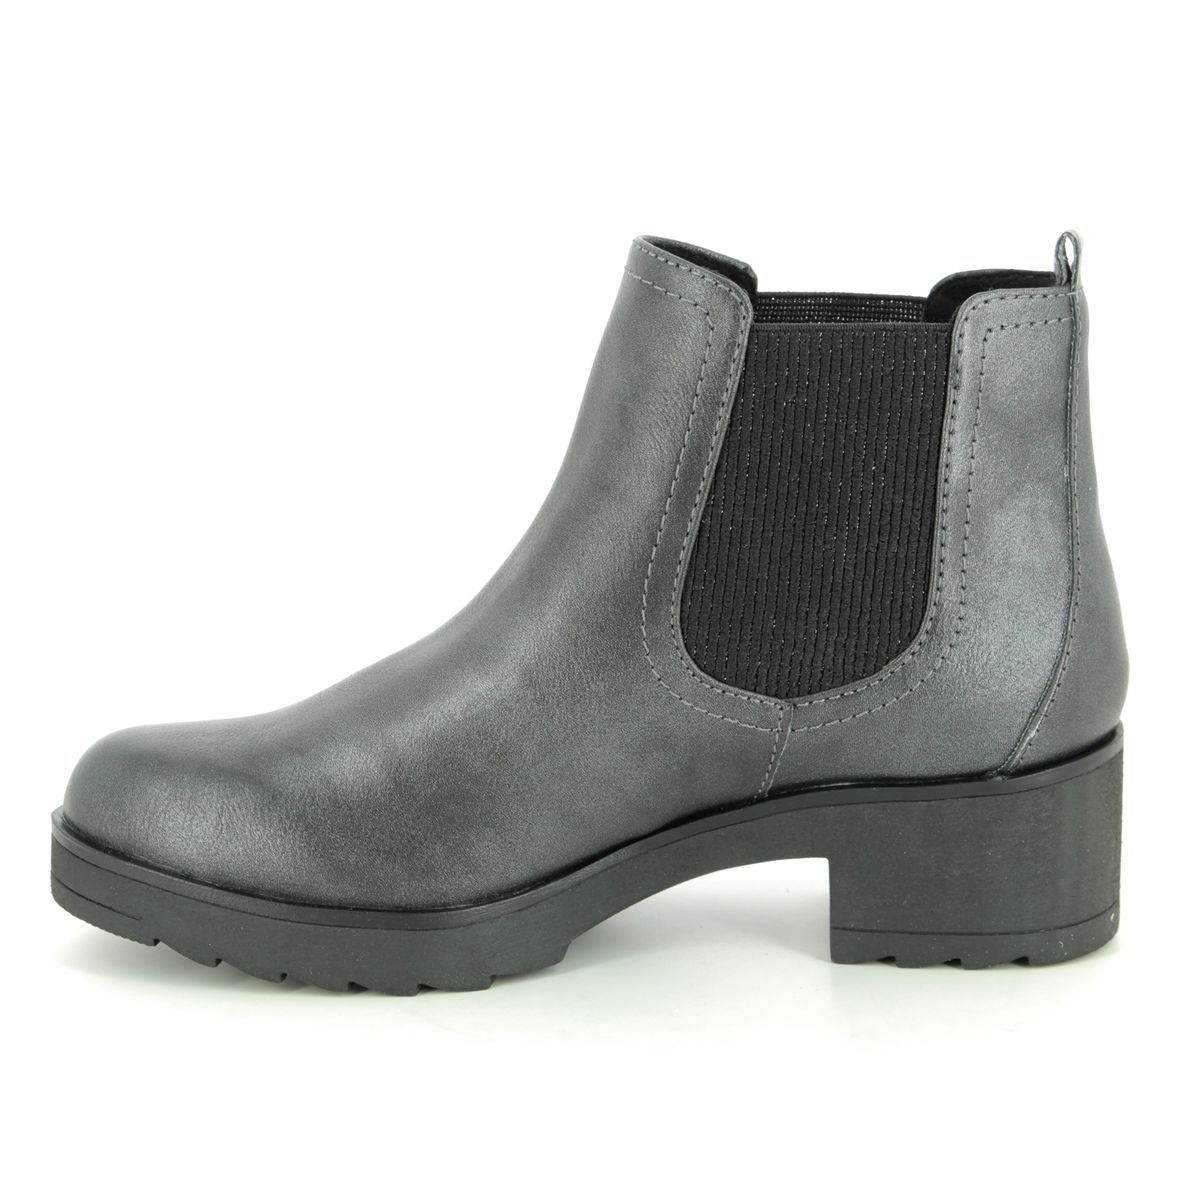 Marco Tozzi Dono Chelsea 95 25806-33-937 Pewter Chelsea Boots